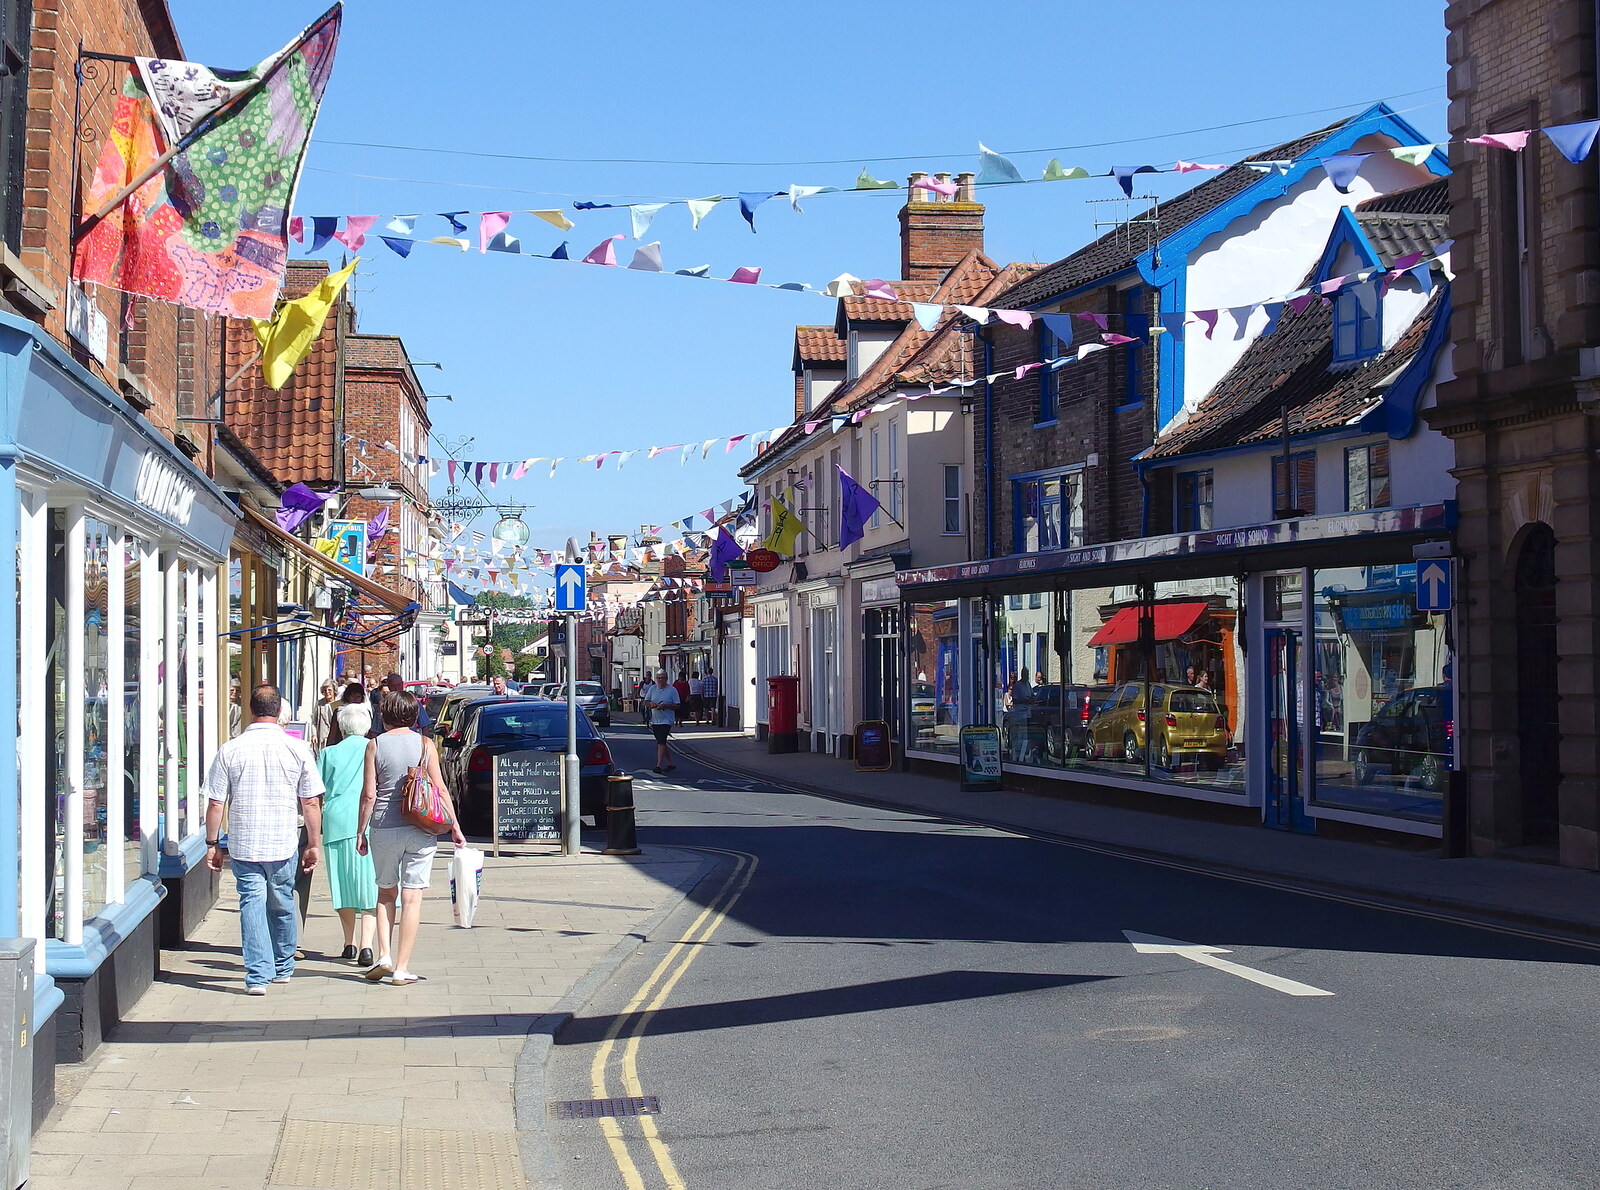 Harleston High Street from Pigeon-Eating Hawks and the Mellis Beer Festival, London and Suffolk - 31st August 2013